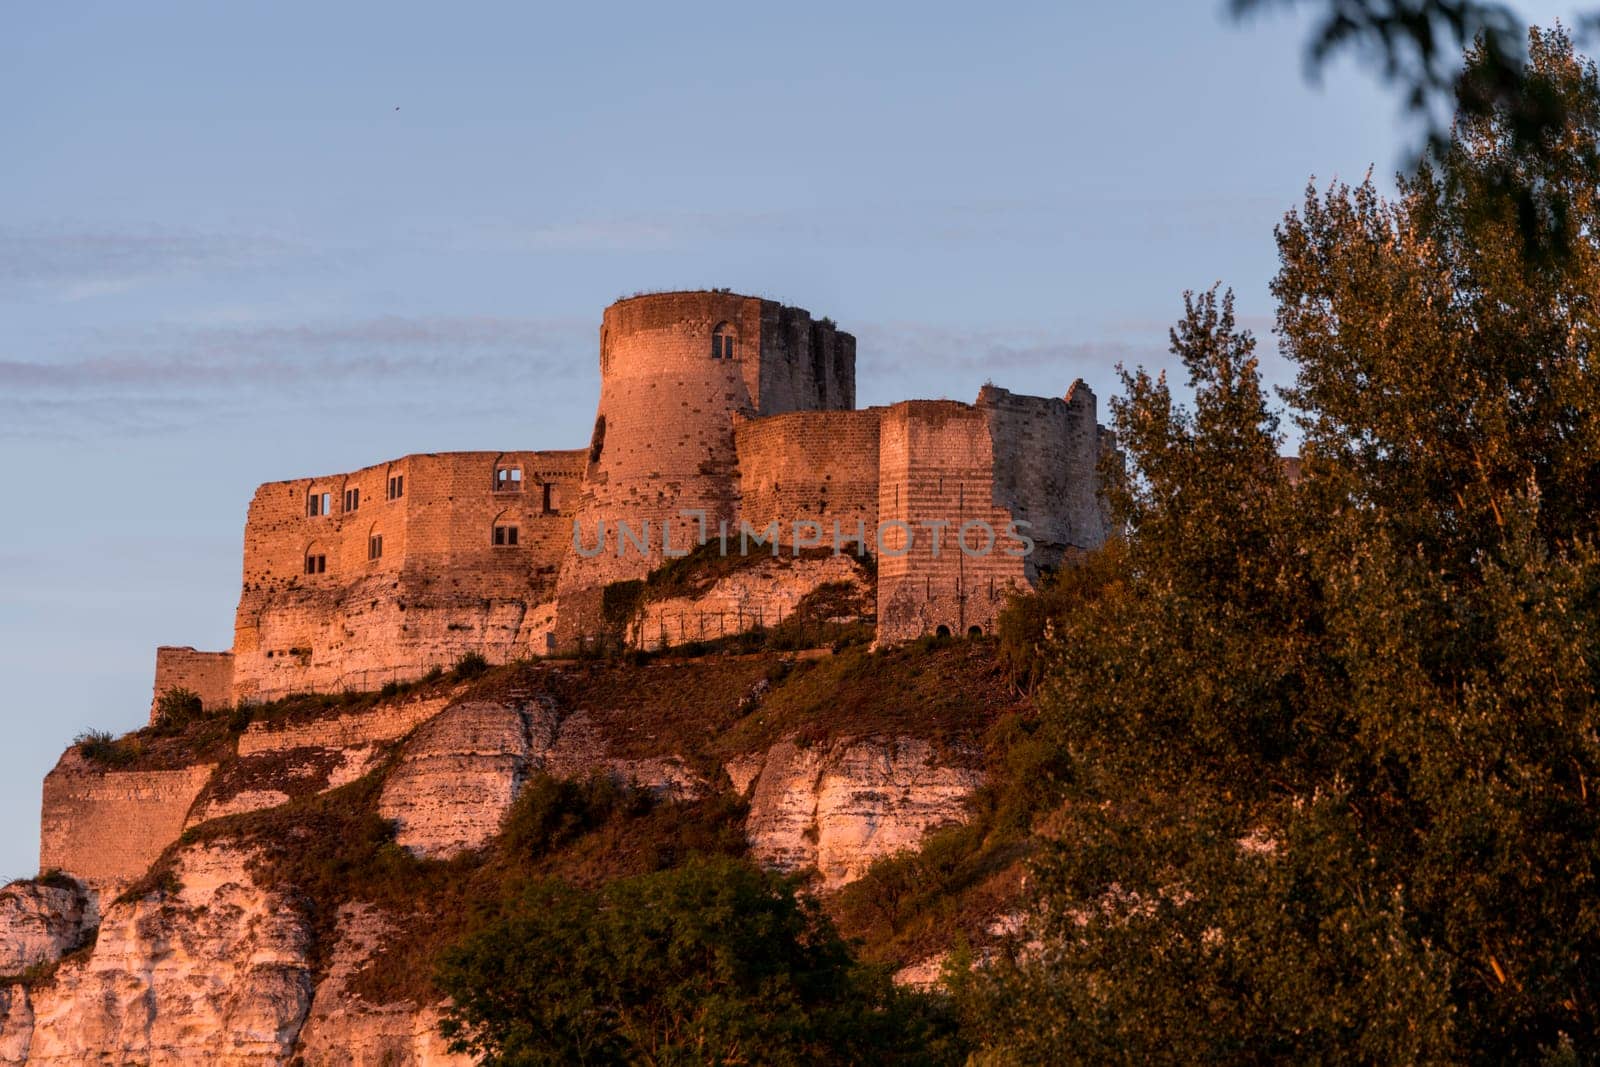 The Chateau de Beynac towers over the town of Beynac which clings to the rocks in a bend of the Dordogne river, France during golden hour